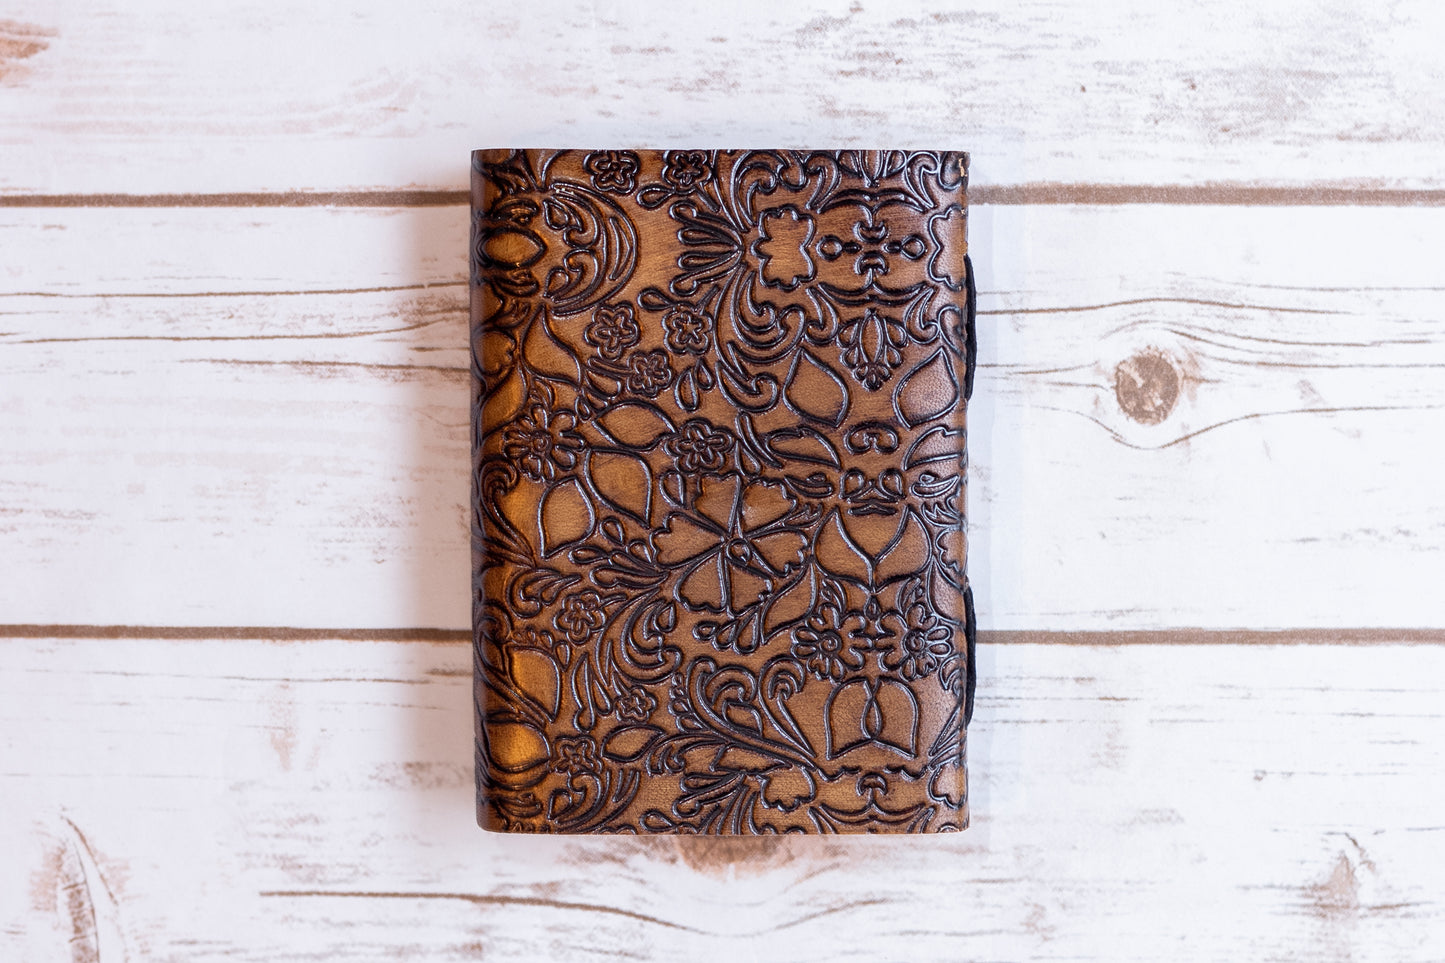 Floral Embossed Latch Journal